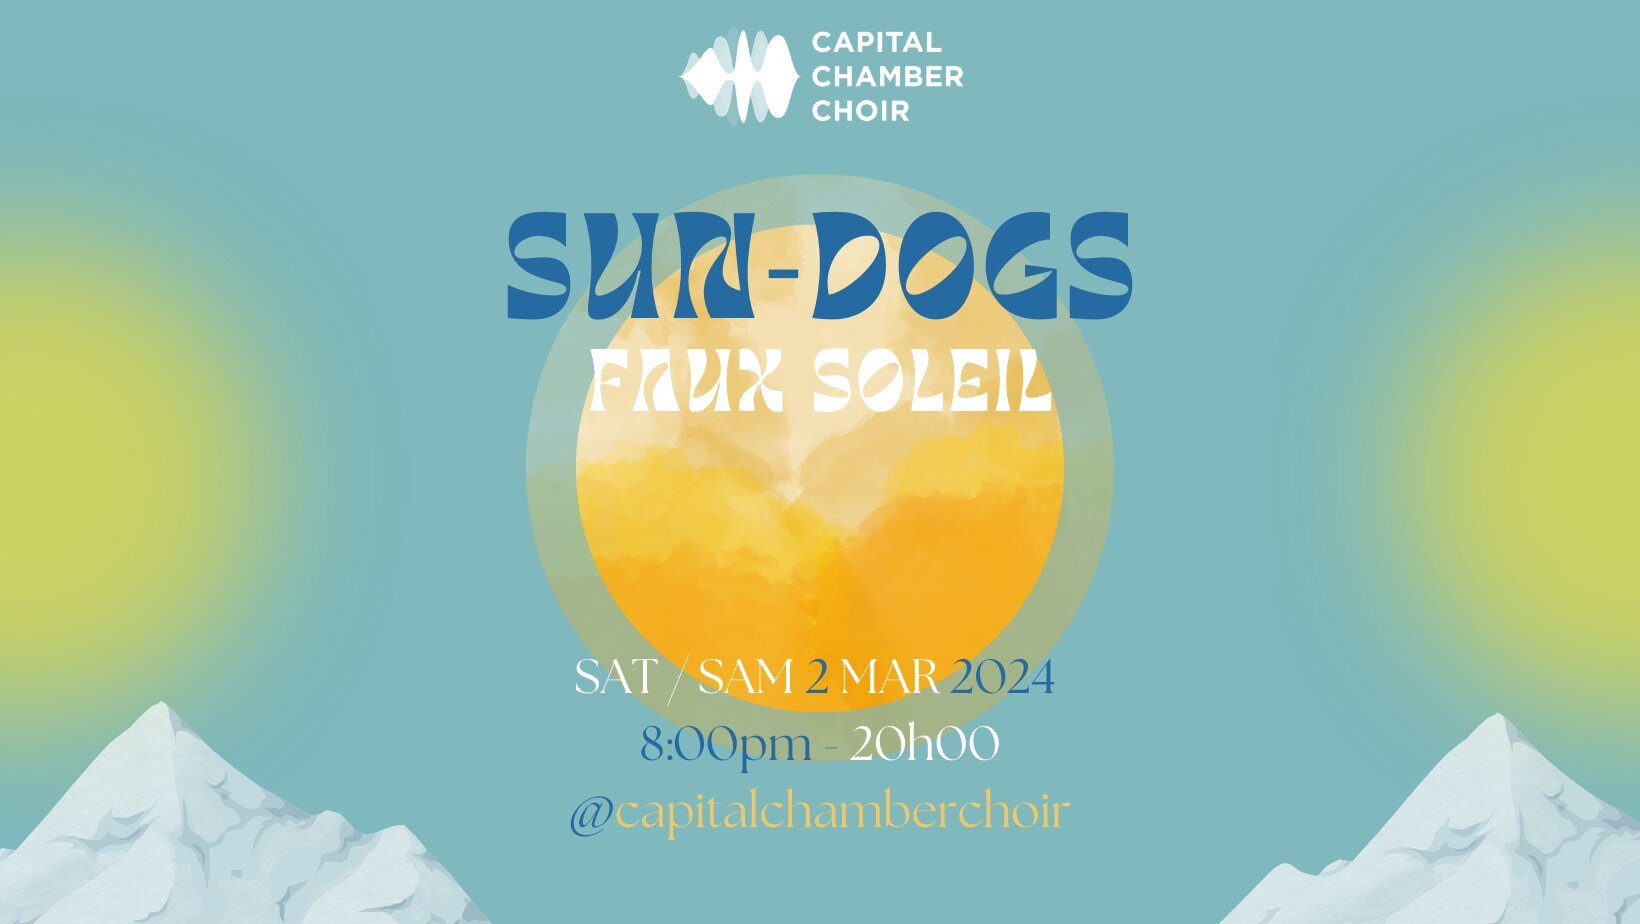 TODAY! 📢 We accept cash, debit, and credit at the doors if you haven't snagged an online ticket before 5:00pm. TICKET link in bio⬆⬆⬆

#sundogs #choir #choral #concert #ottawamusic #ottawachoir #canadianmusic #rehearsal